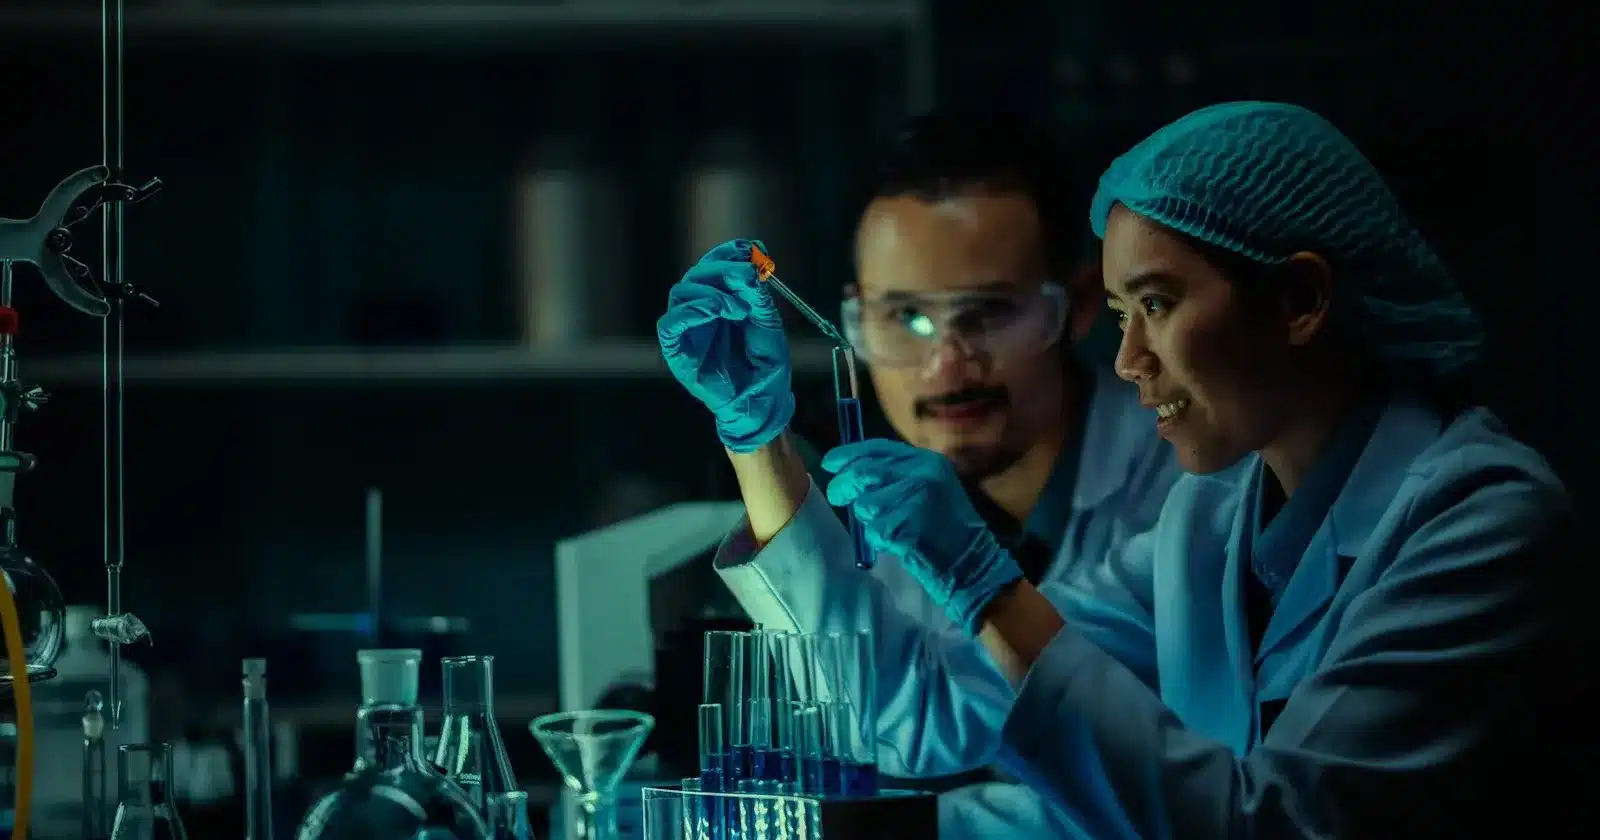 Image of Two scientists in lab coats conducting an experiment with a test tubeto go along with the “Back to the Lab: The Adventures of Griffin and Karen Exp 5